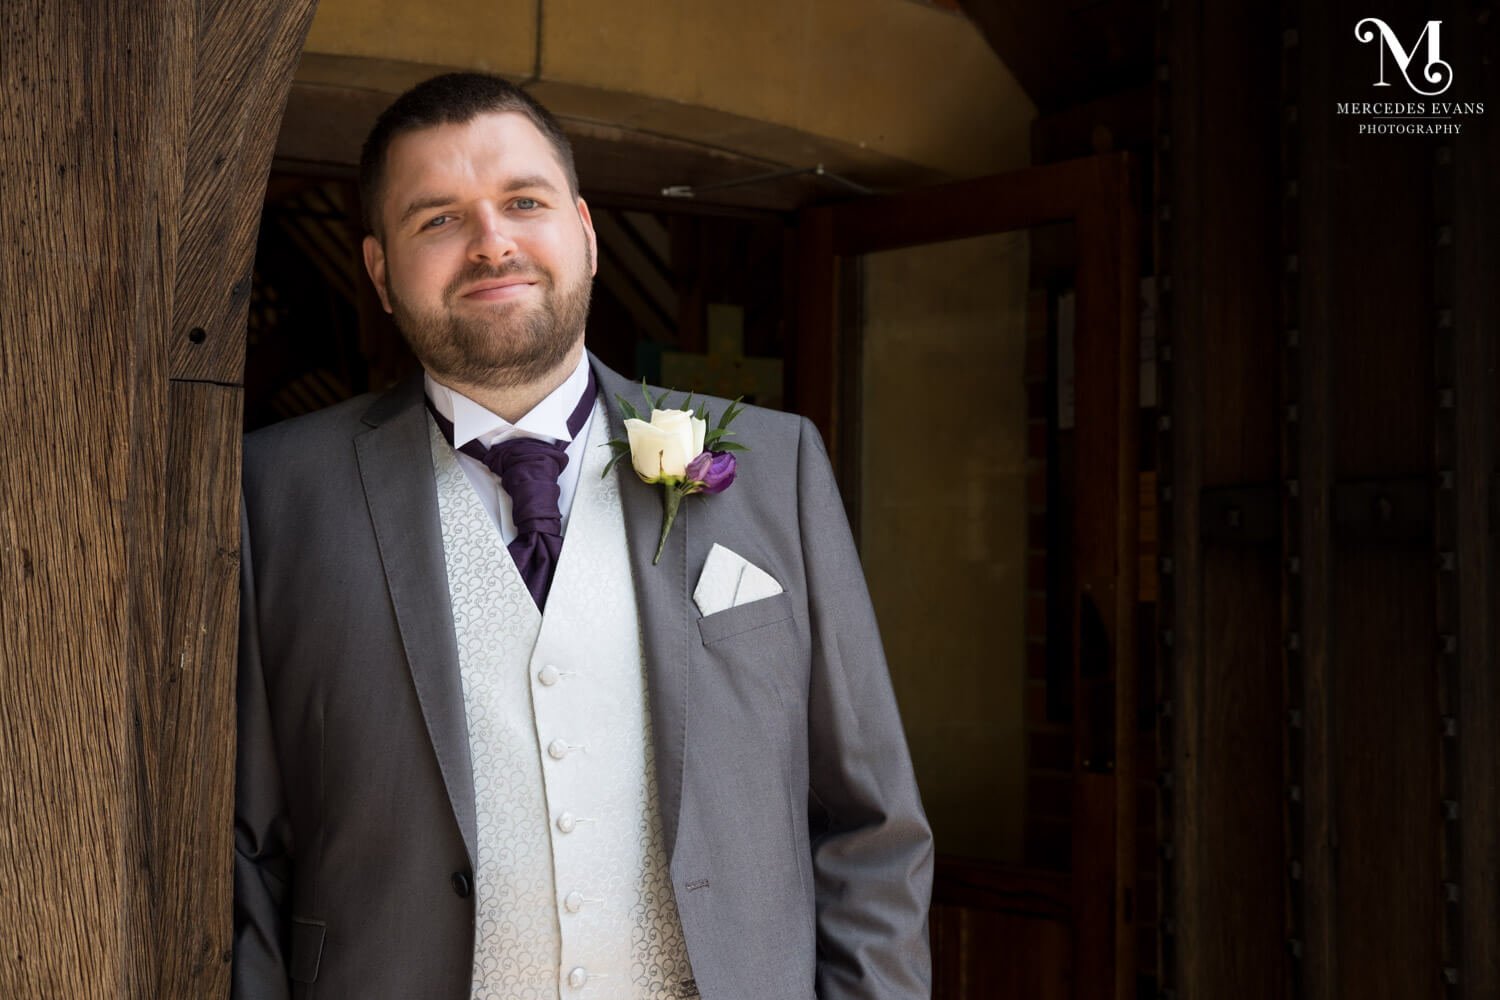 The groom leans against the doorway of St Andrew's church in Frimley